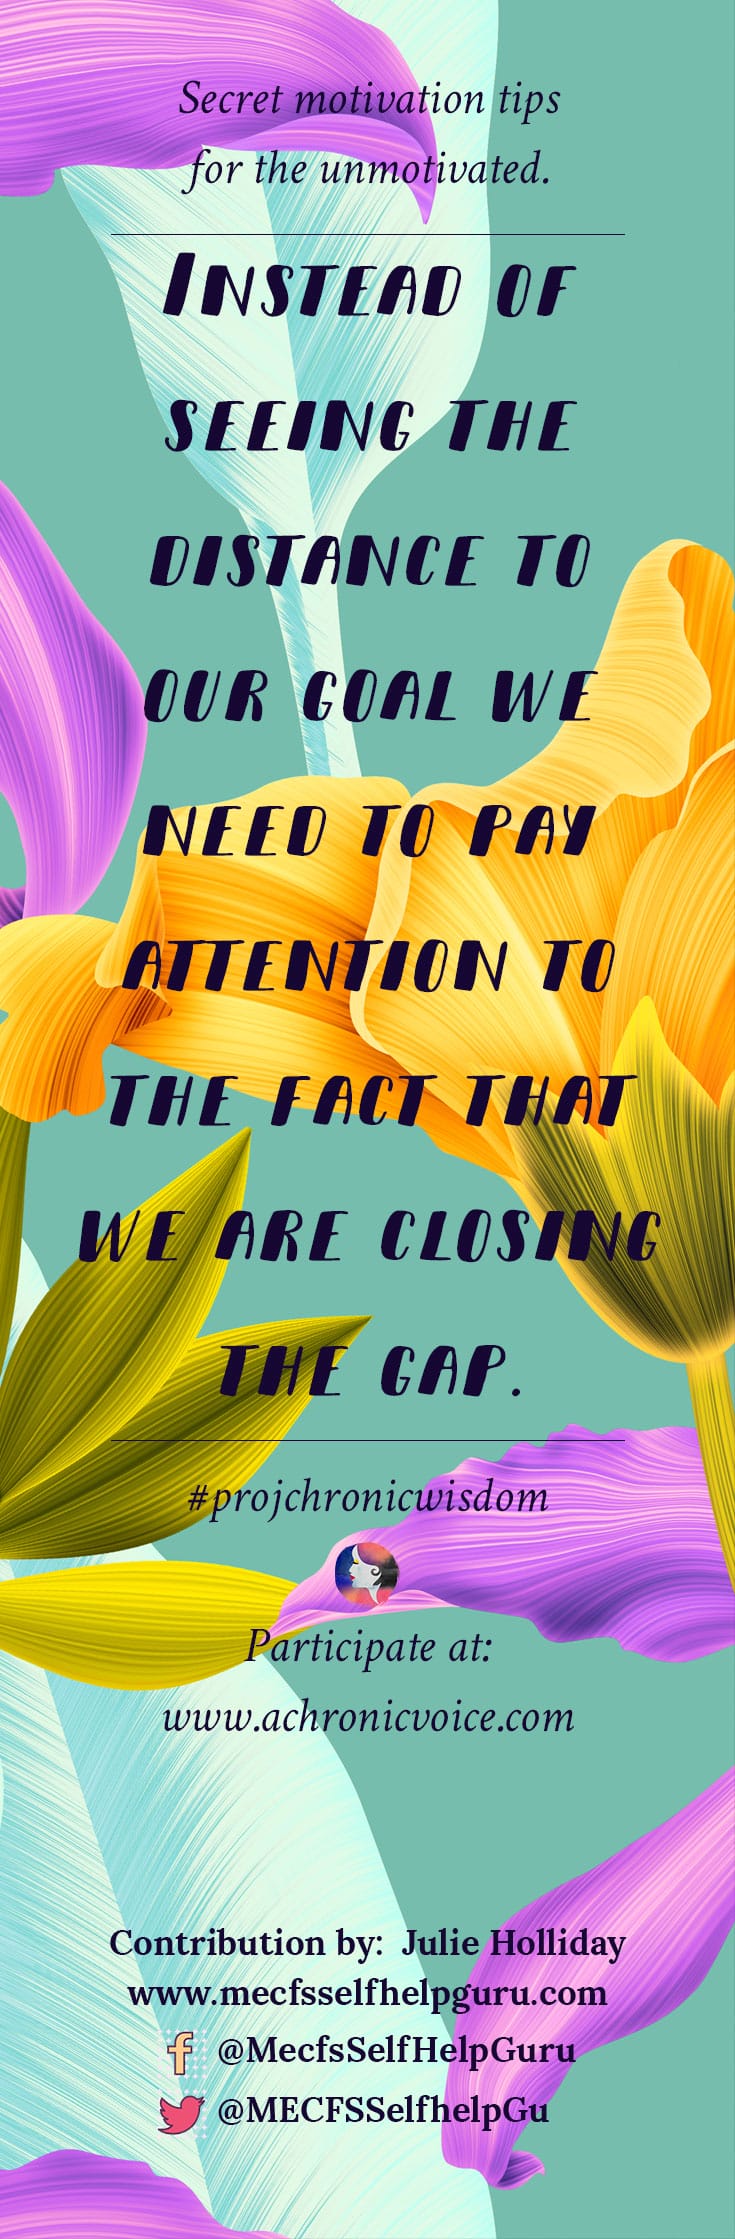 "Instead of seeing the distance to our goal, we need to pay attention to the fact that we are closing the gap." - Julie Holliday | Participate here: www.achronicvoice.com